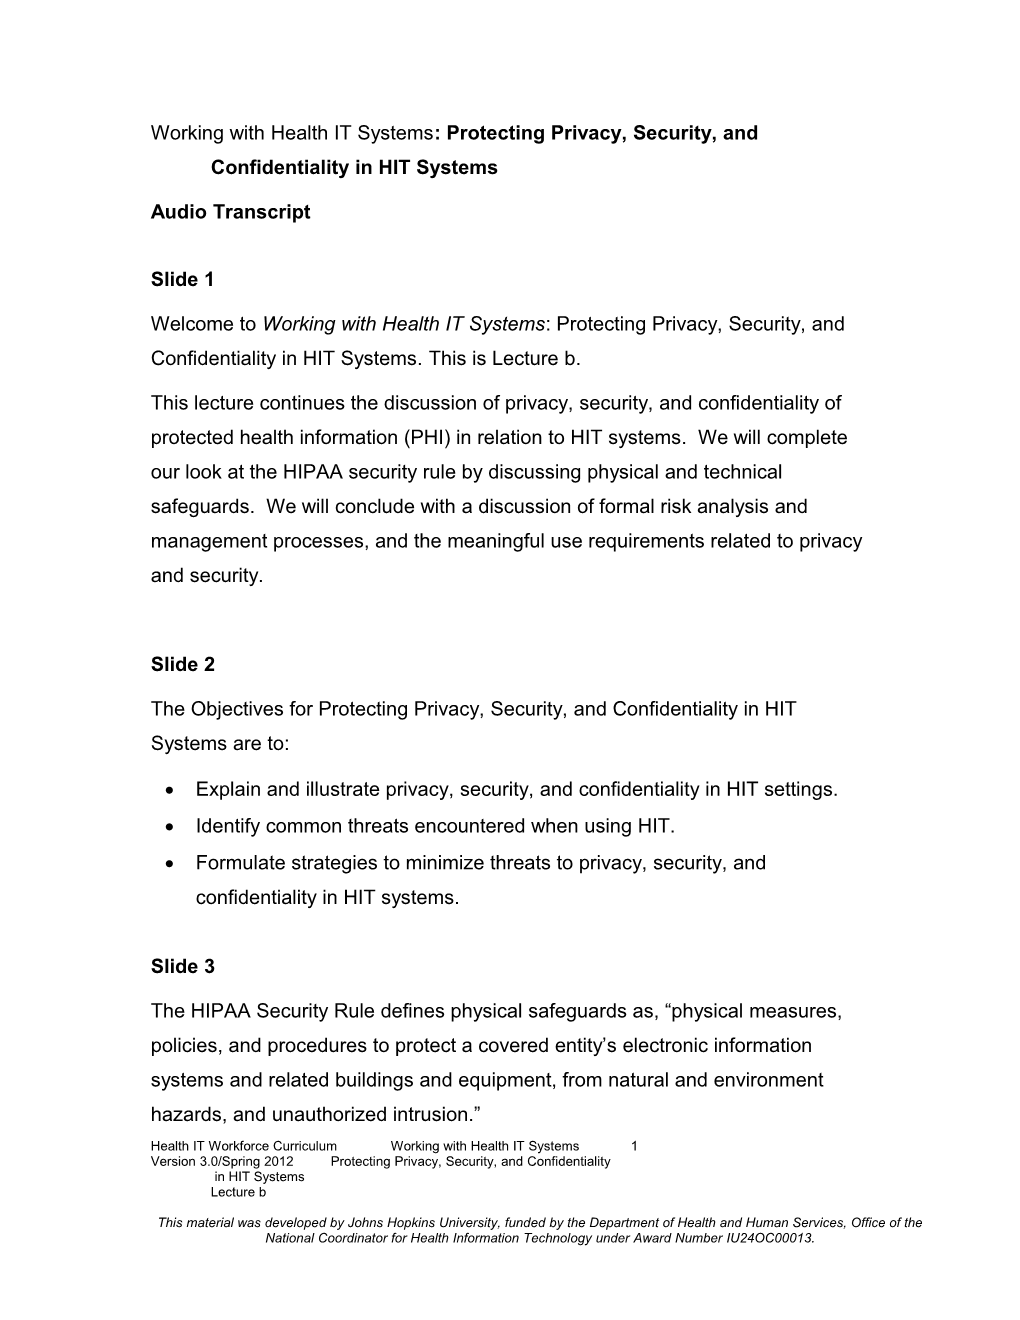 Working with Health IT Systems: Protecting Privacy, Security, and Confidentiality in HIT Systems